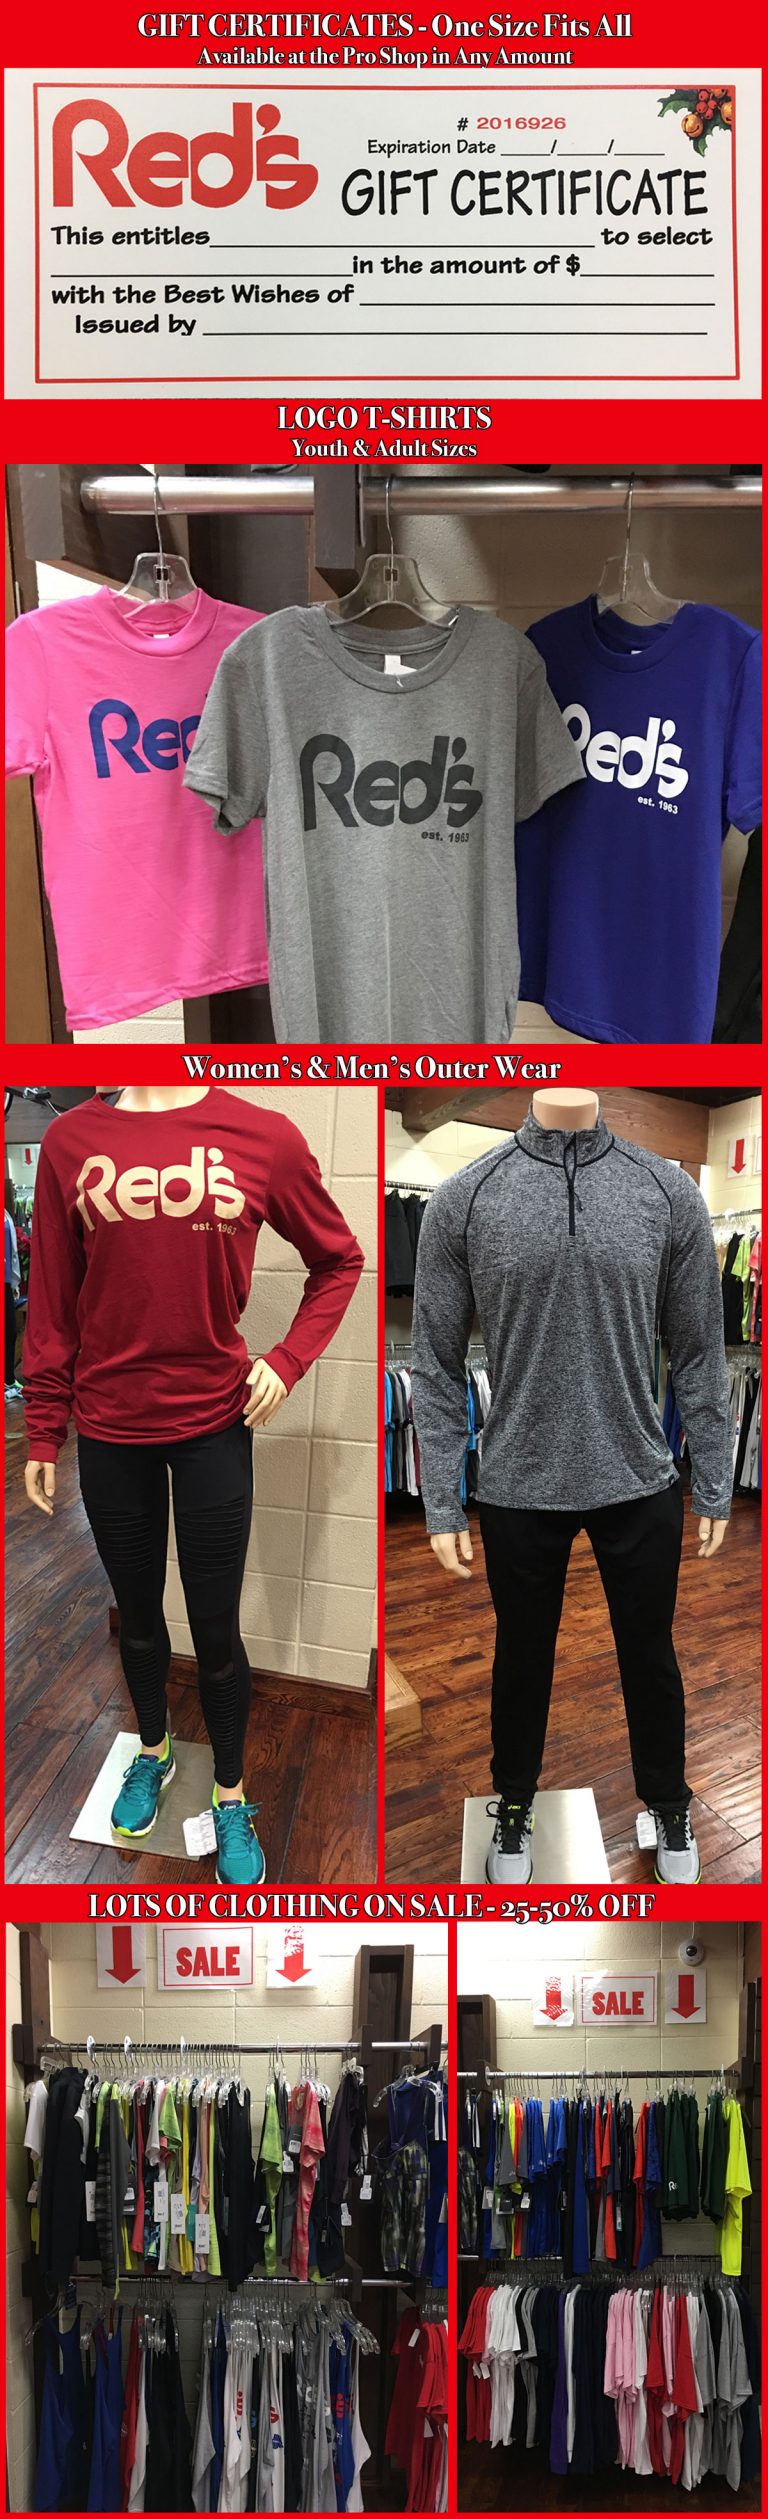 Gift Ideas at Red's